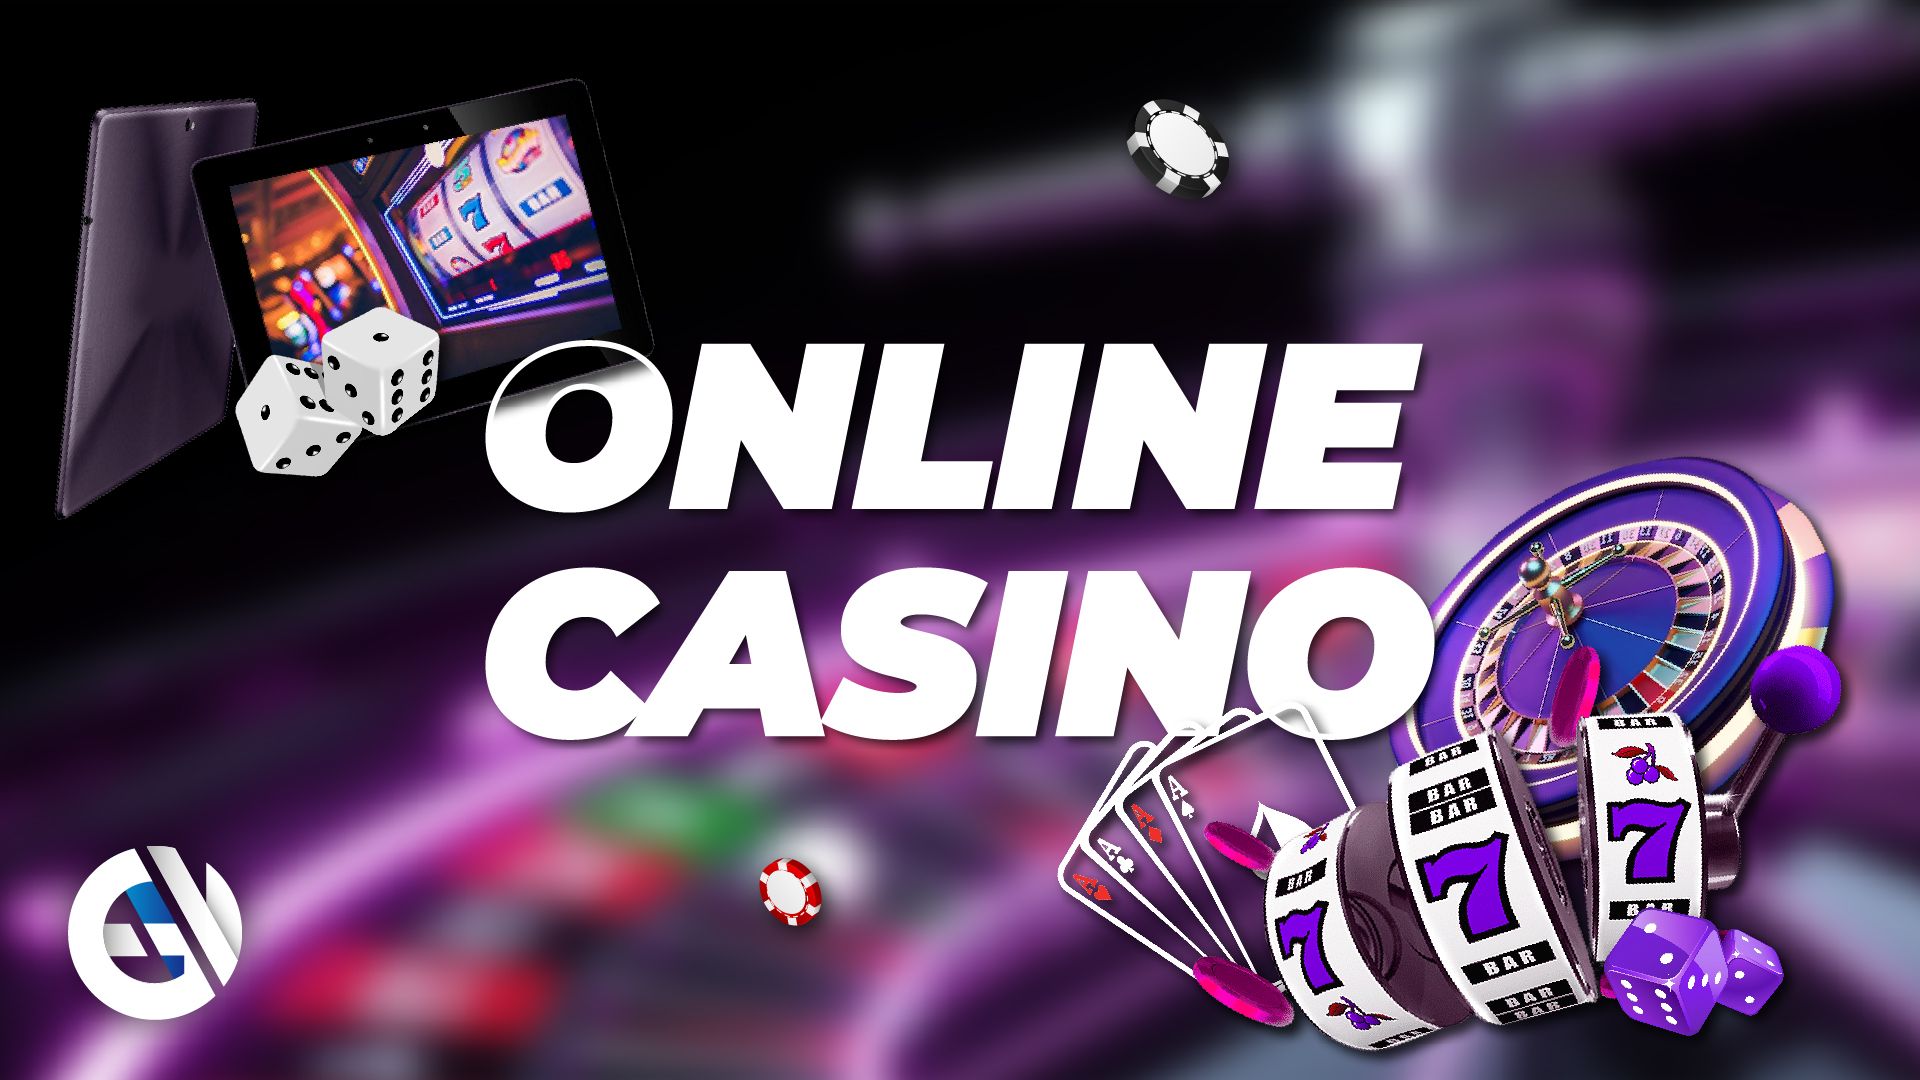 How to Set Up Casino Online?